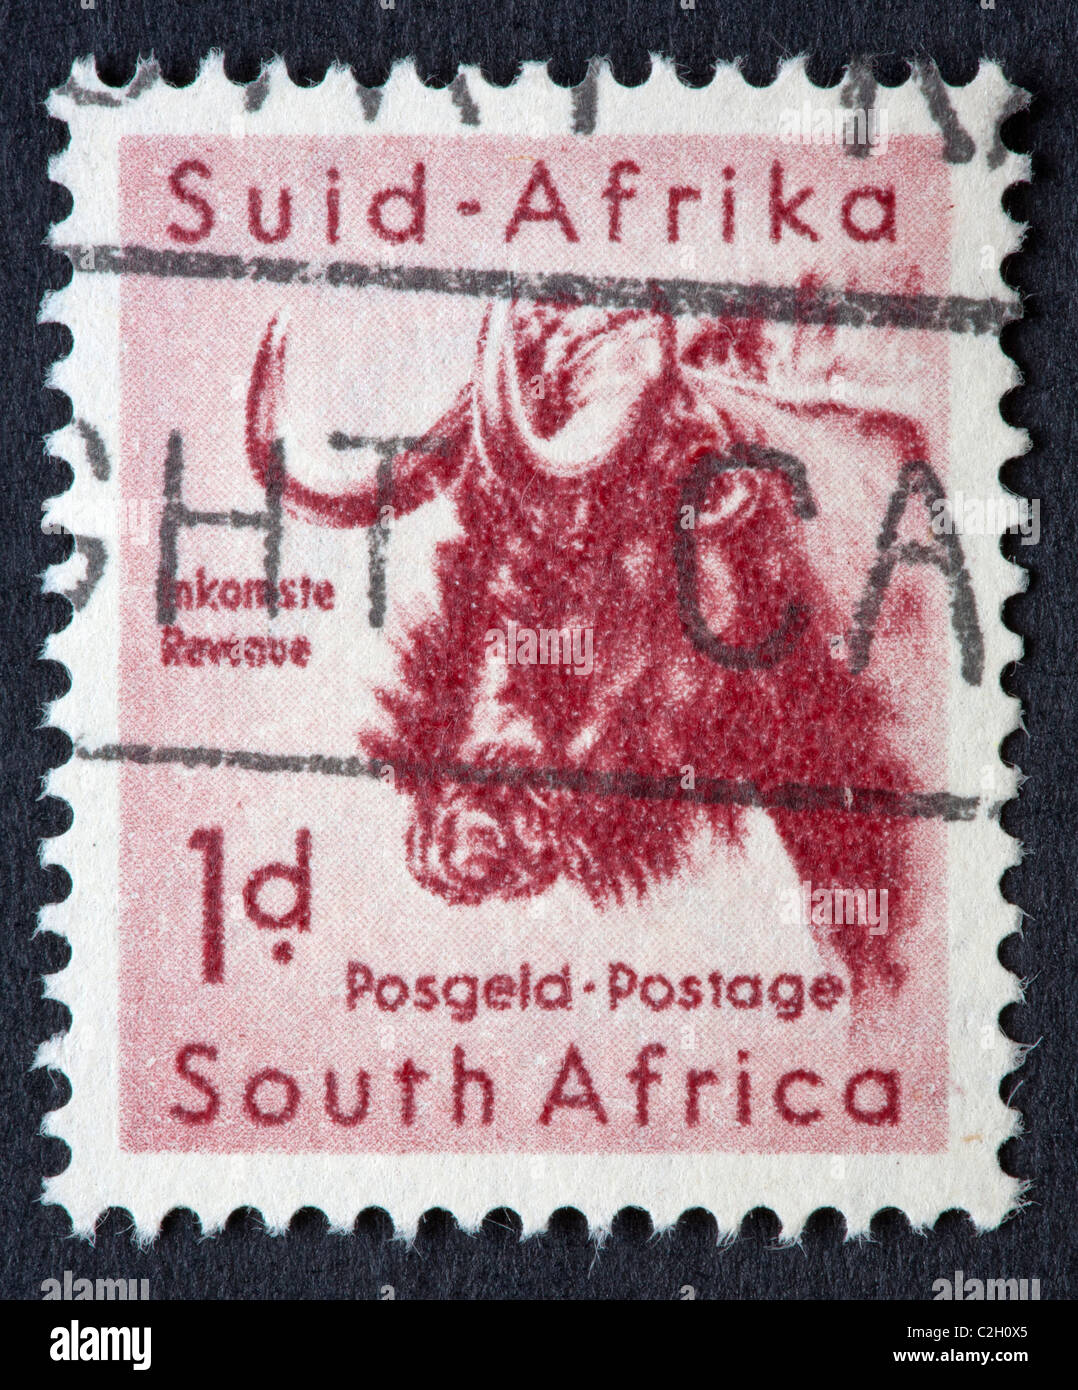 South African postage stamp Stock Photo